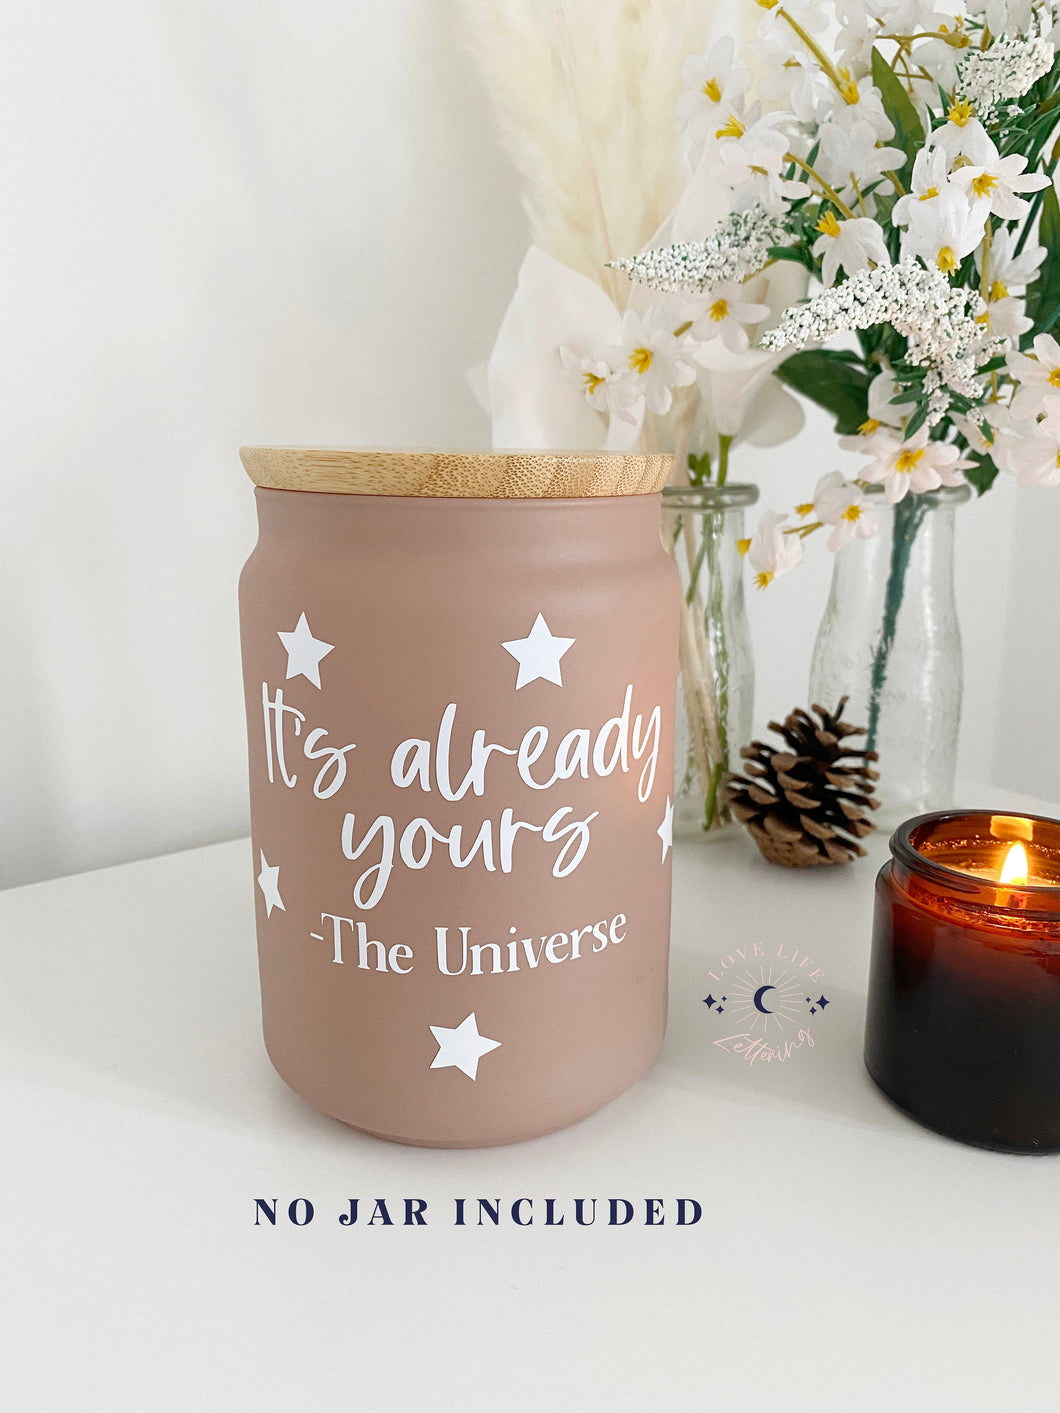 Vinyl Decal 'It's Already Yours - The Universe' // Manifestation Jar or Vision Box Sticker + Stars